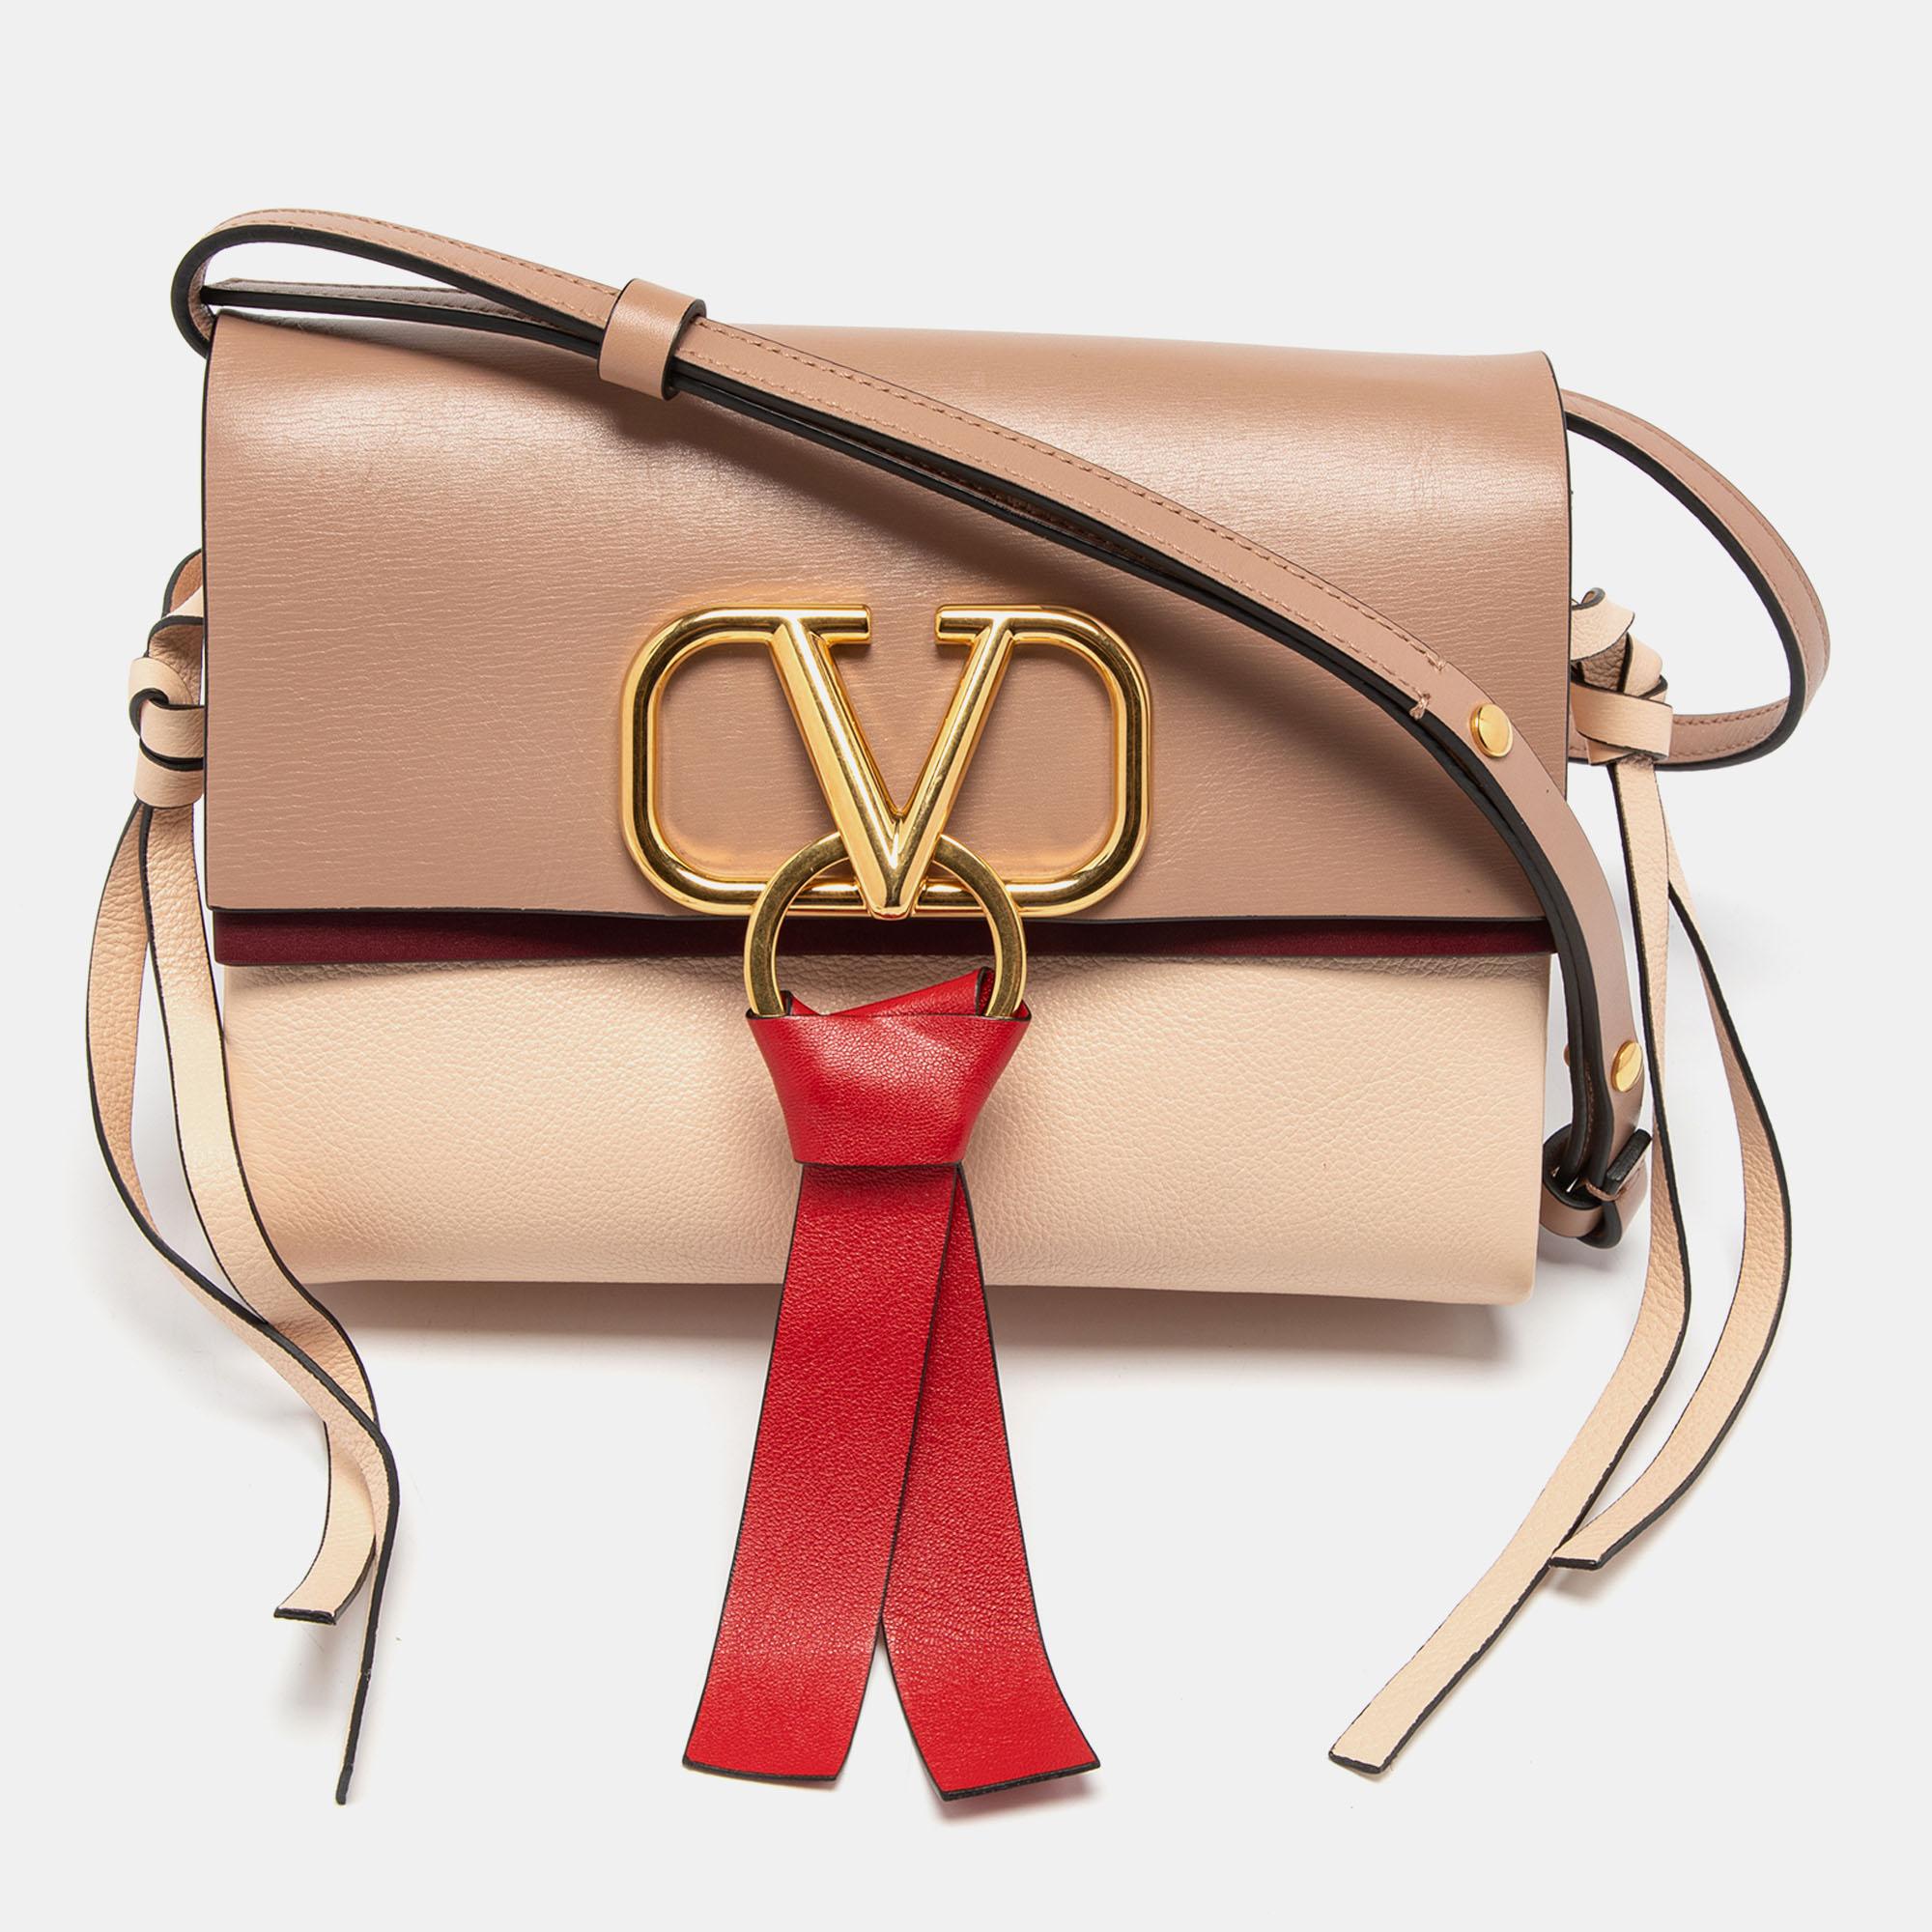 This crossbody bag by Valentino is a great option for carrying your essentials. This leather bag has a compact size and a flap to secure the leather interior. Designed to be ideal for everyday use, this crossbody bag is a must-have.